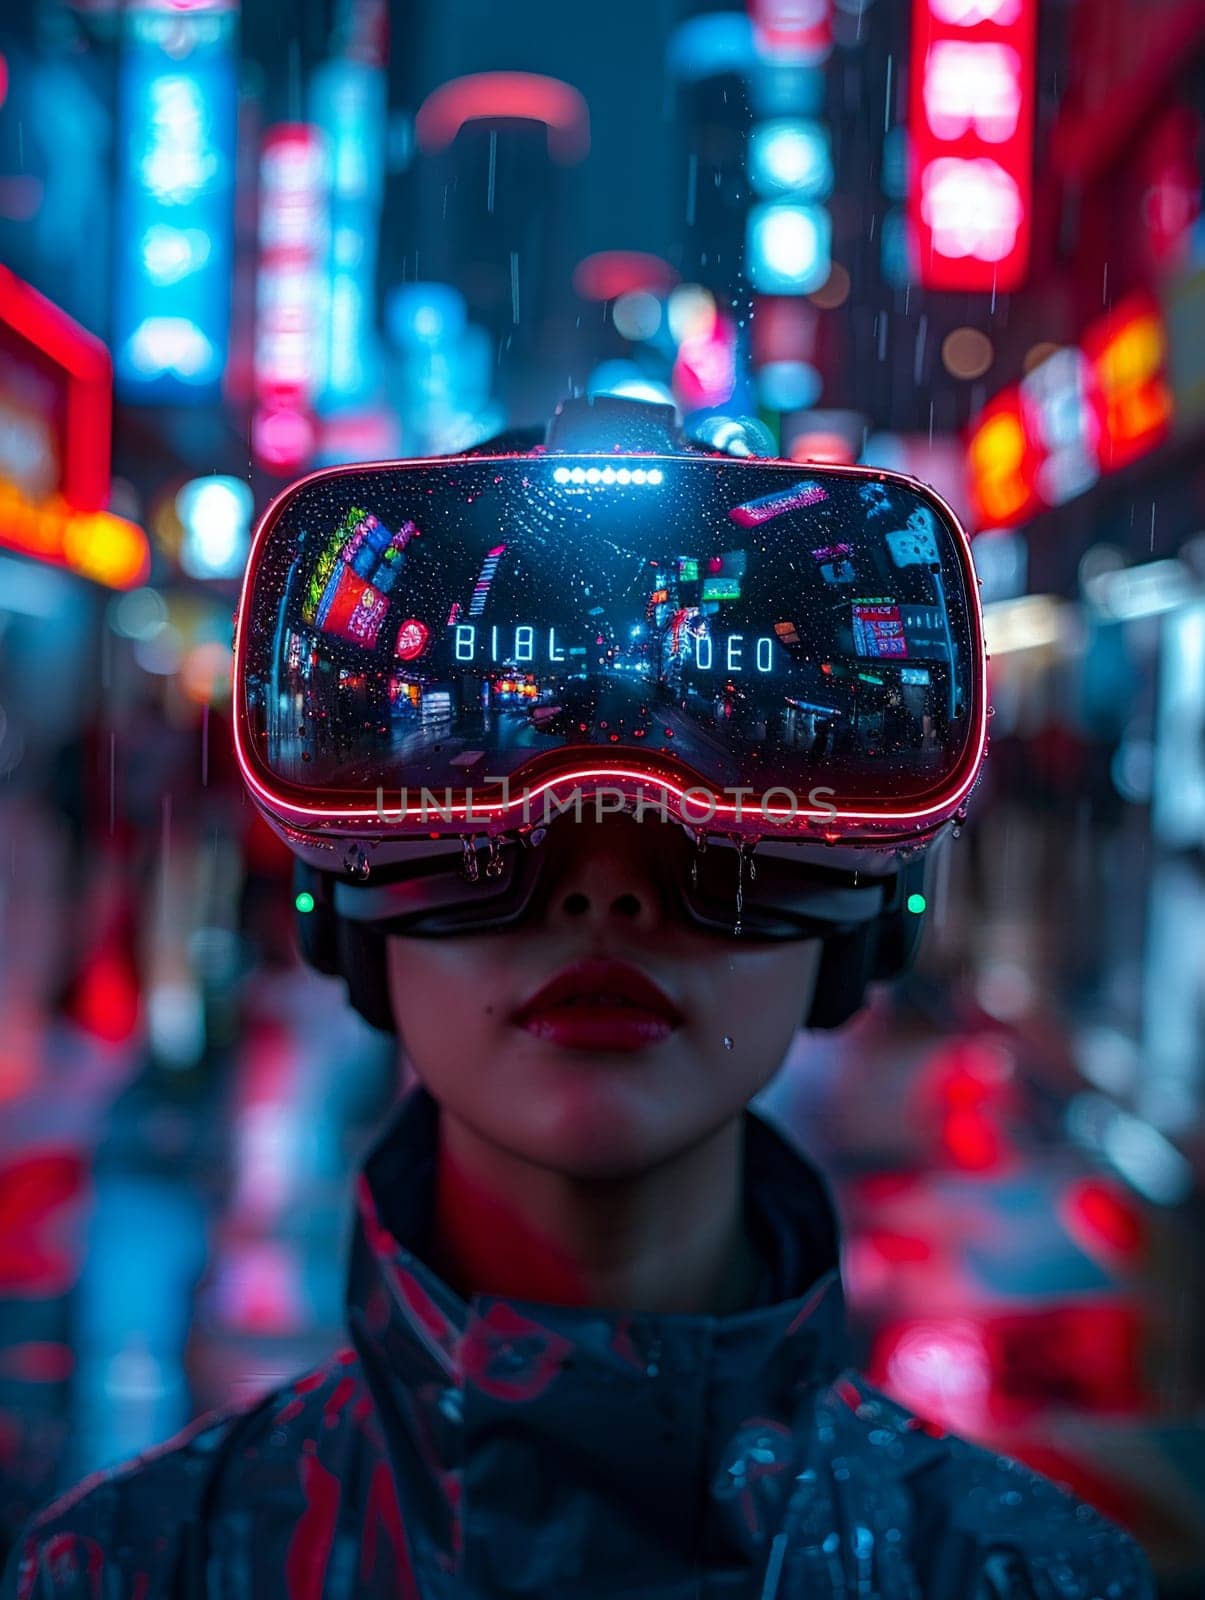 Virtual Reality Gaming Space Explores Digital Frontiers in Business of Interactive Escapism, VR goggles and digital landscapes explore a story of digital frontiers and interactive escapism in the virtual reality gaming space business.